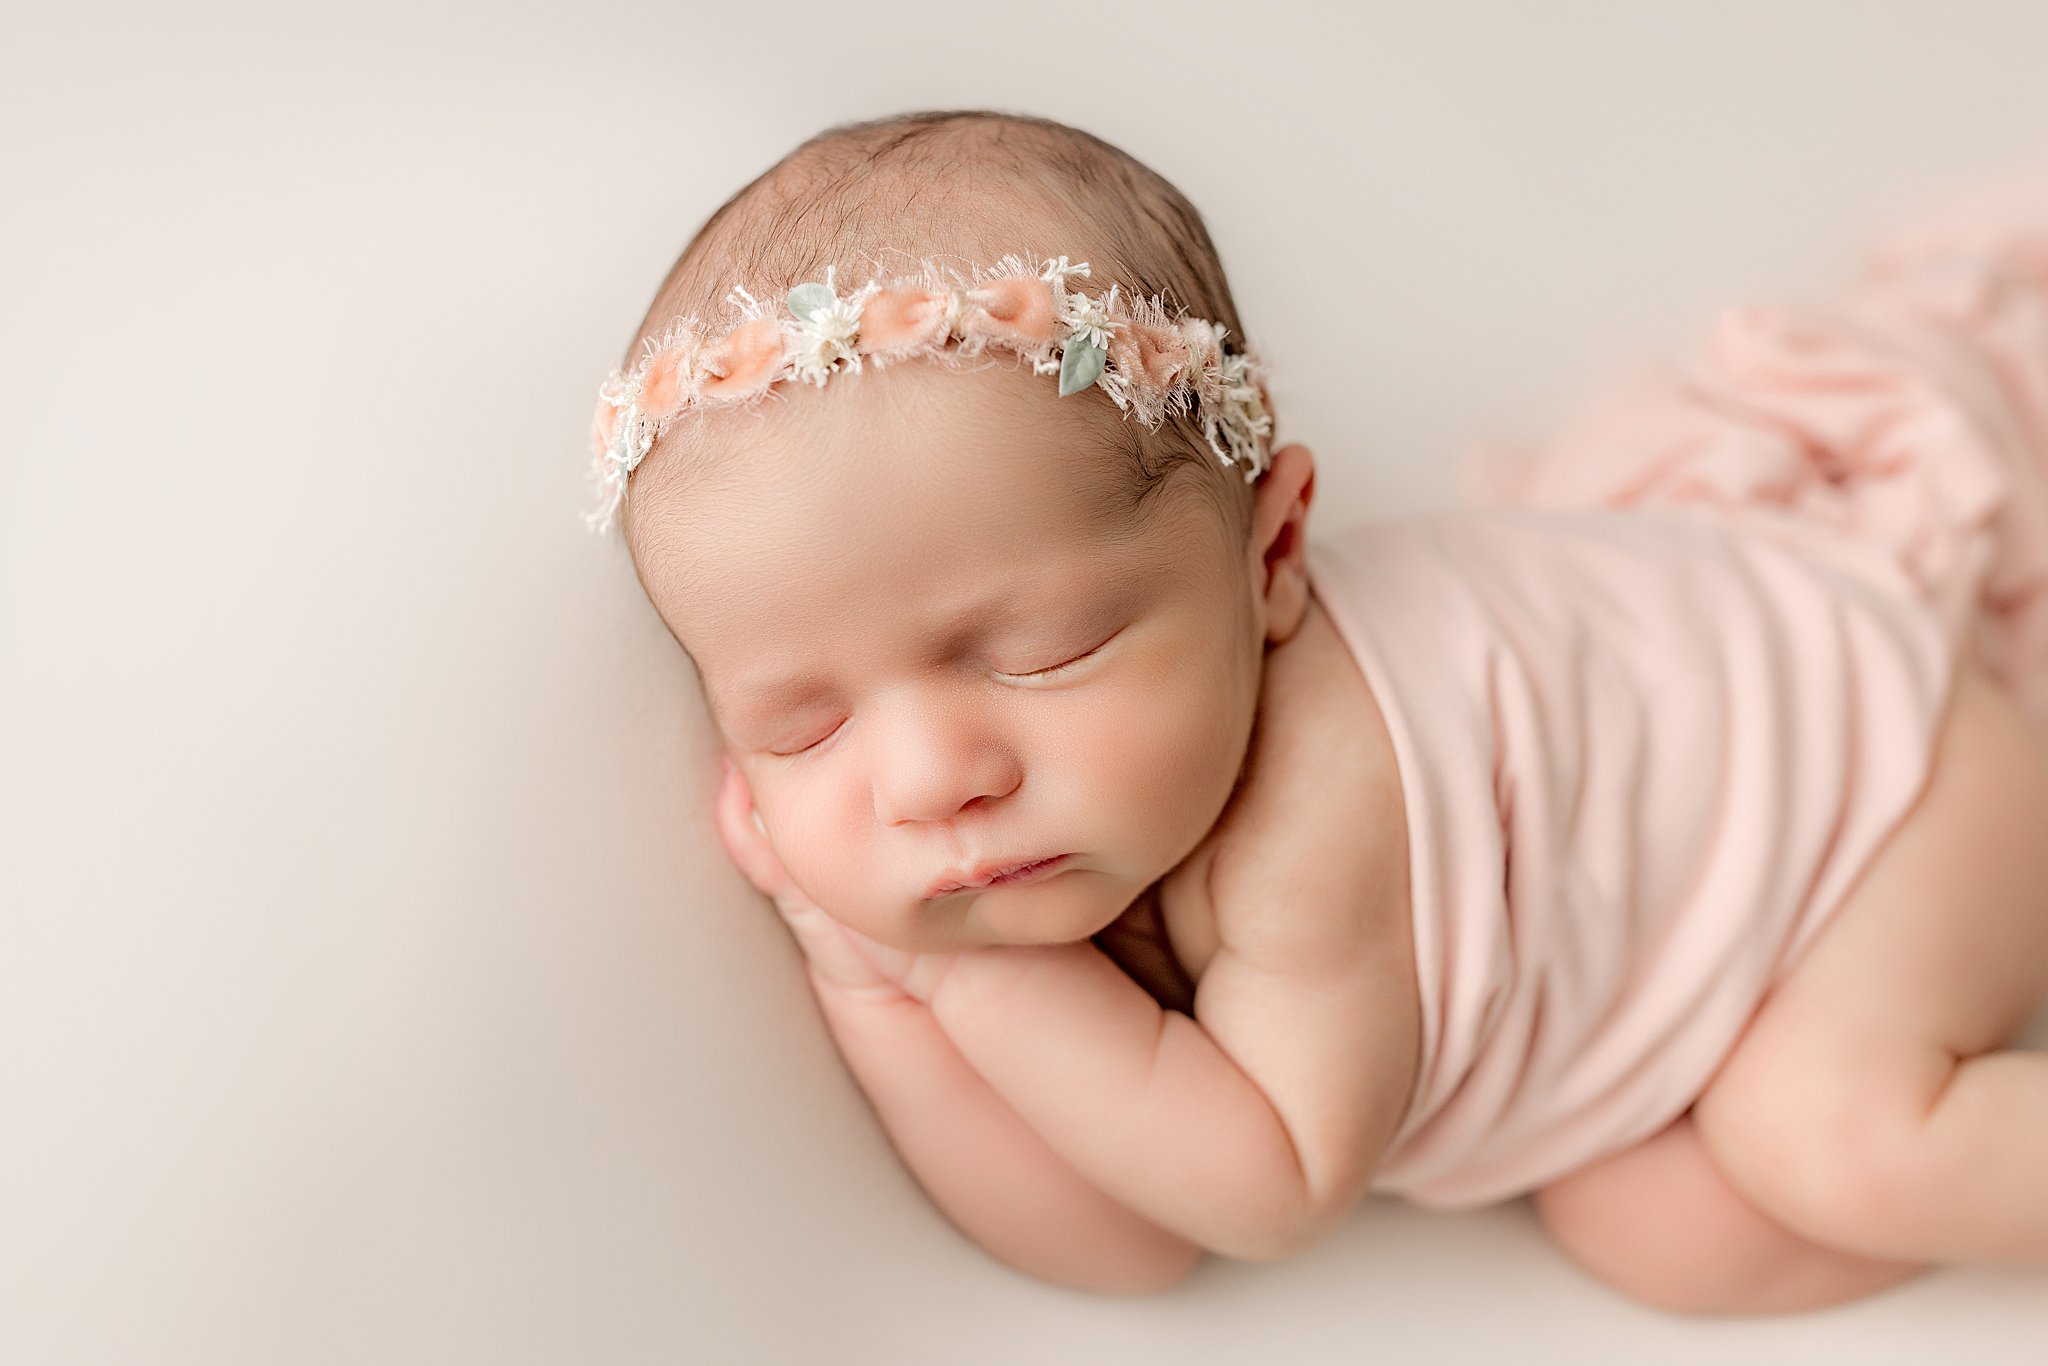 A newborn baby wrapped in a pink blanket sleeps on its hands wearing a floral headband lowcountry baby boutique